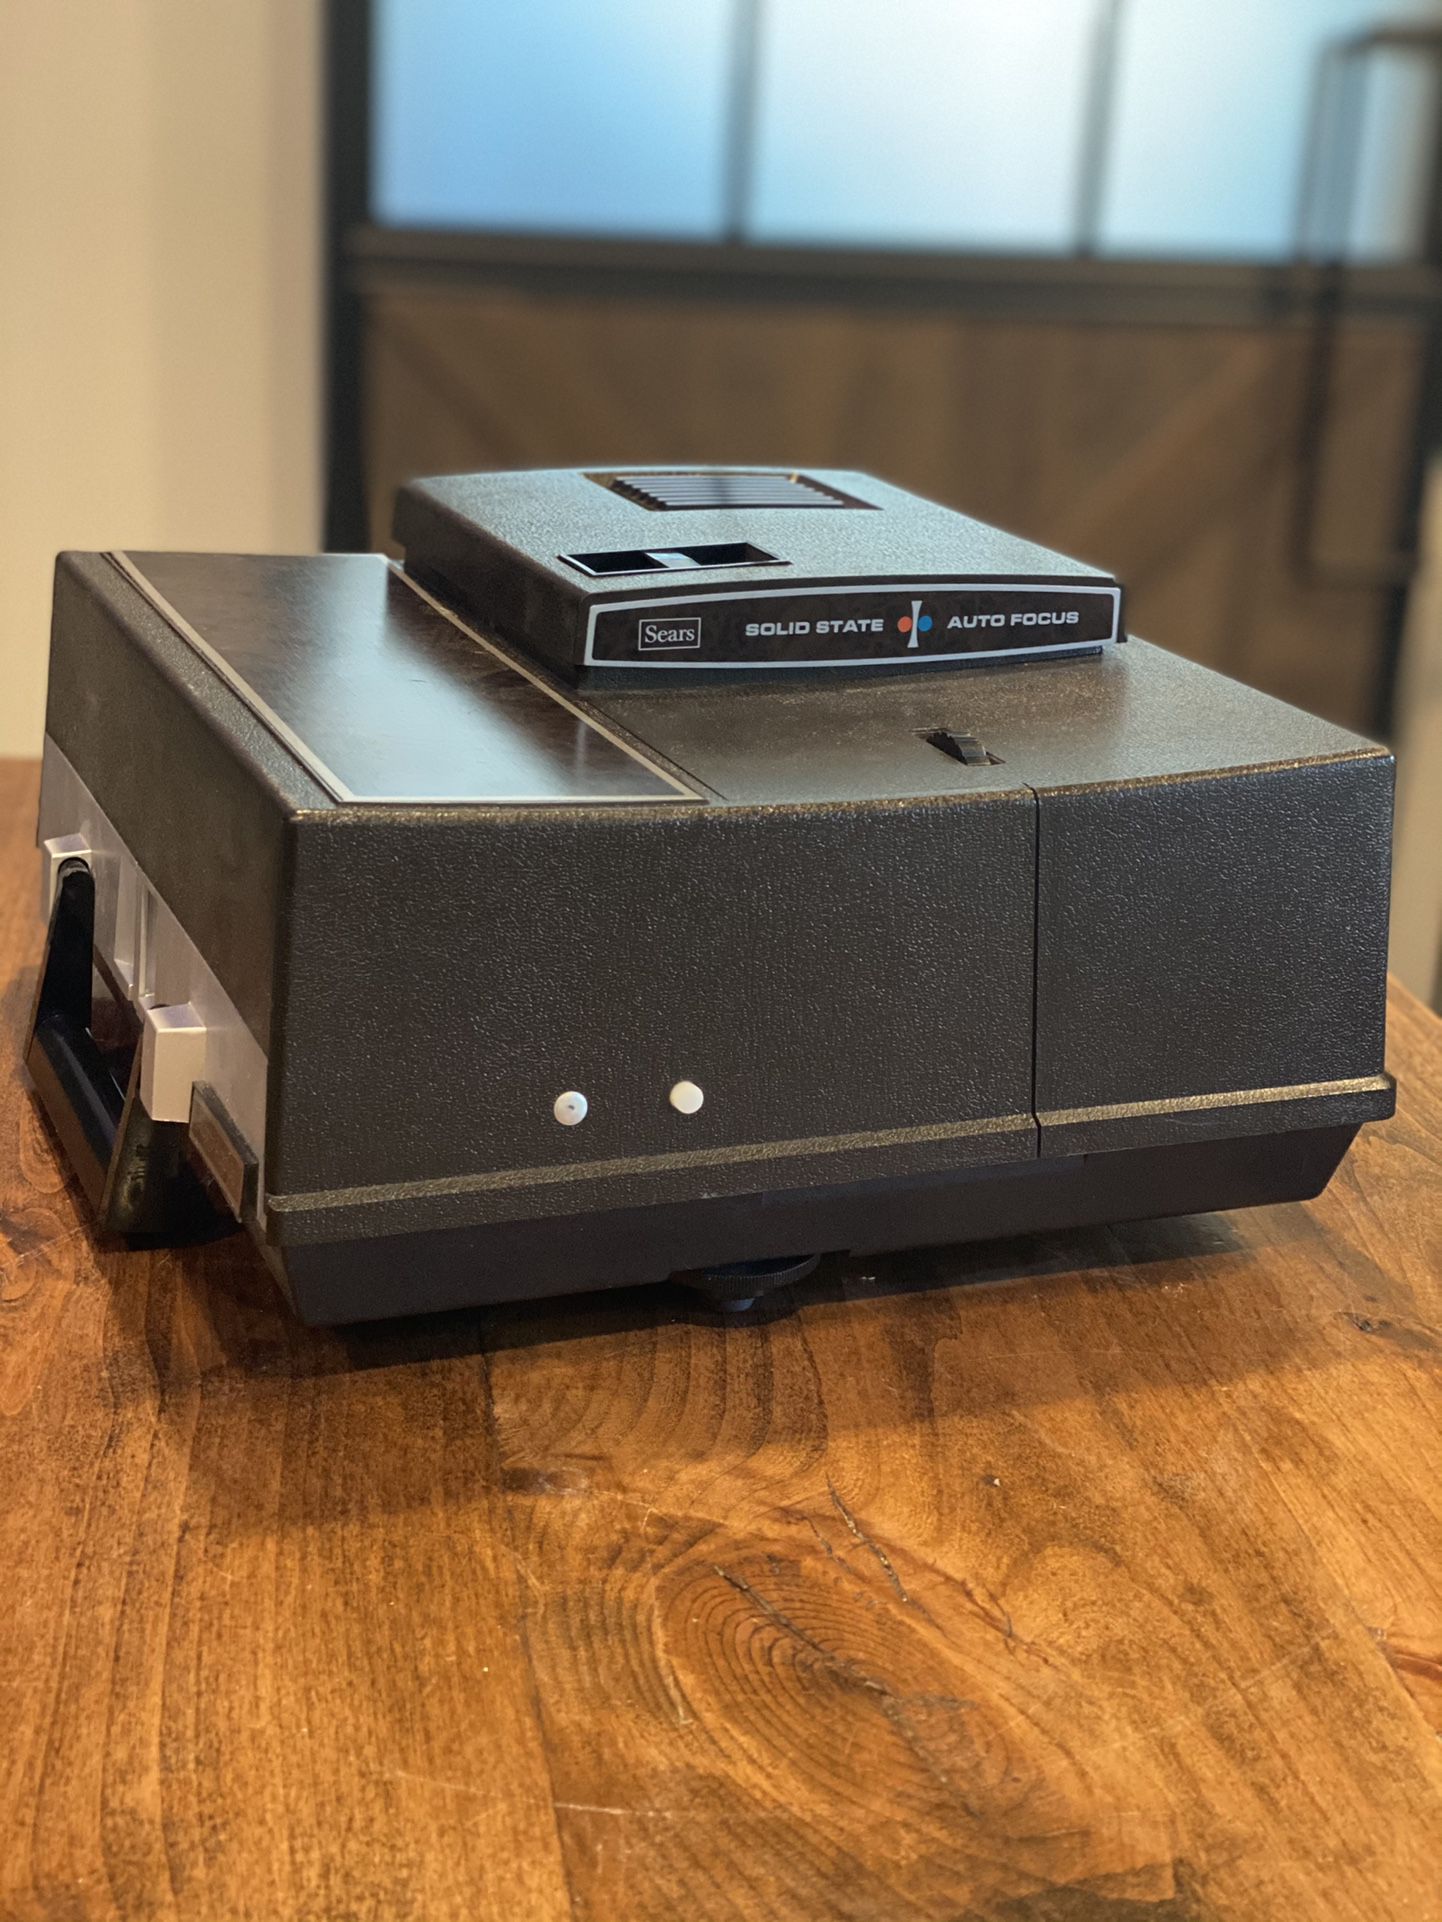 Vintage Sears Solid State Auto Focus Model 9884 Slide Projector